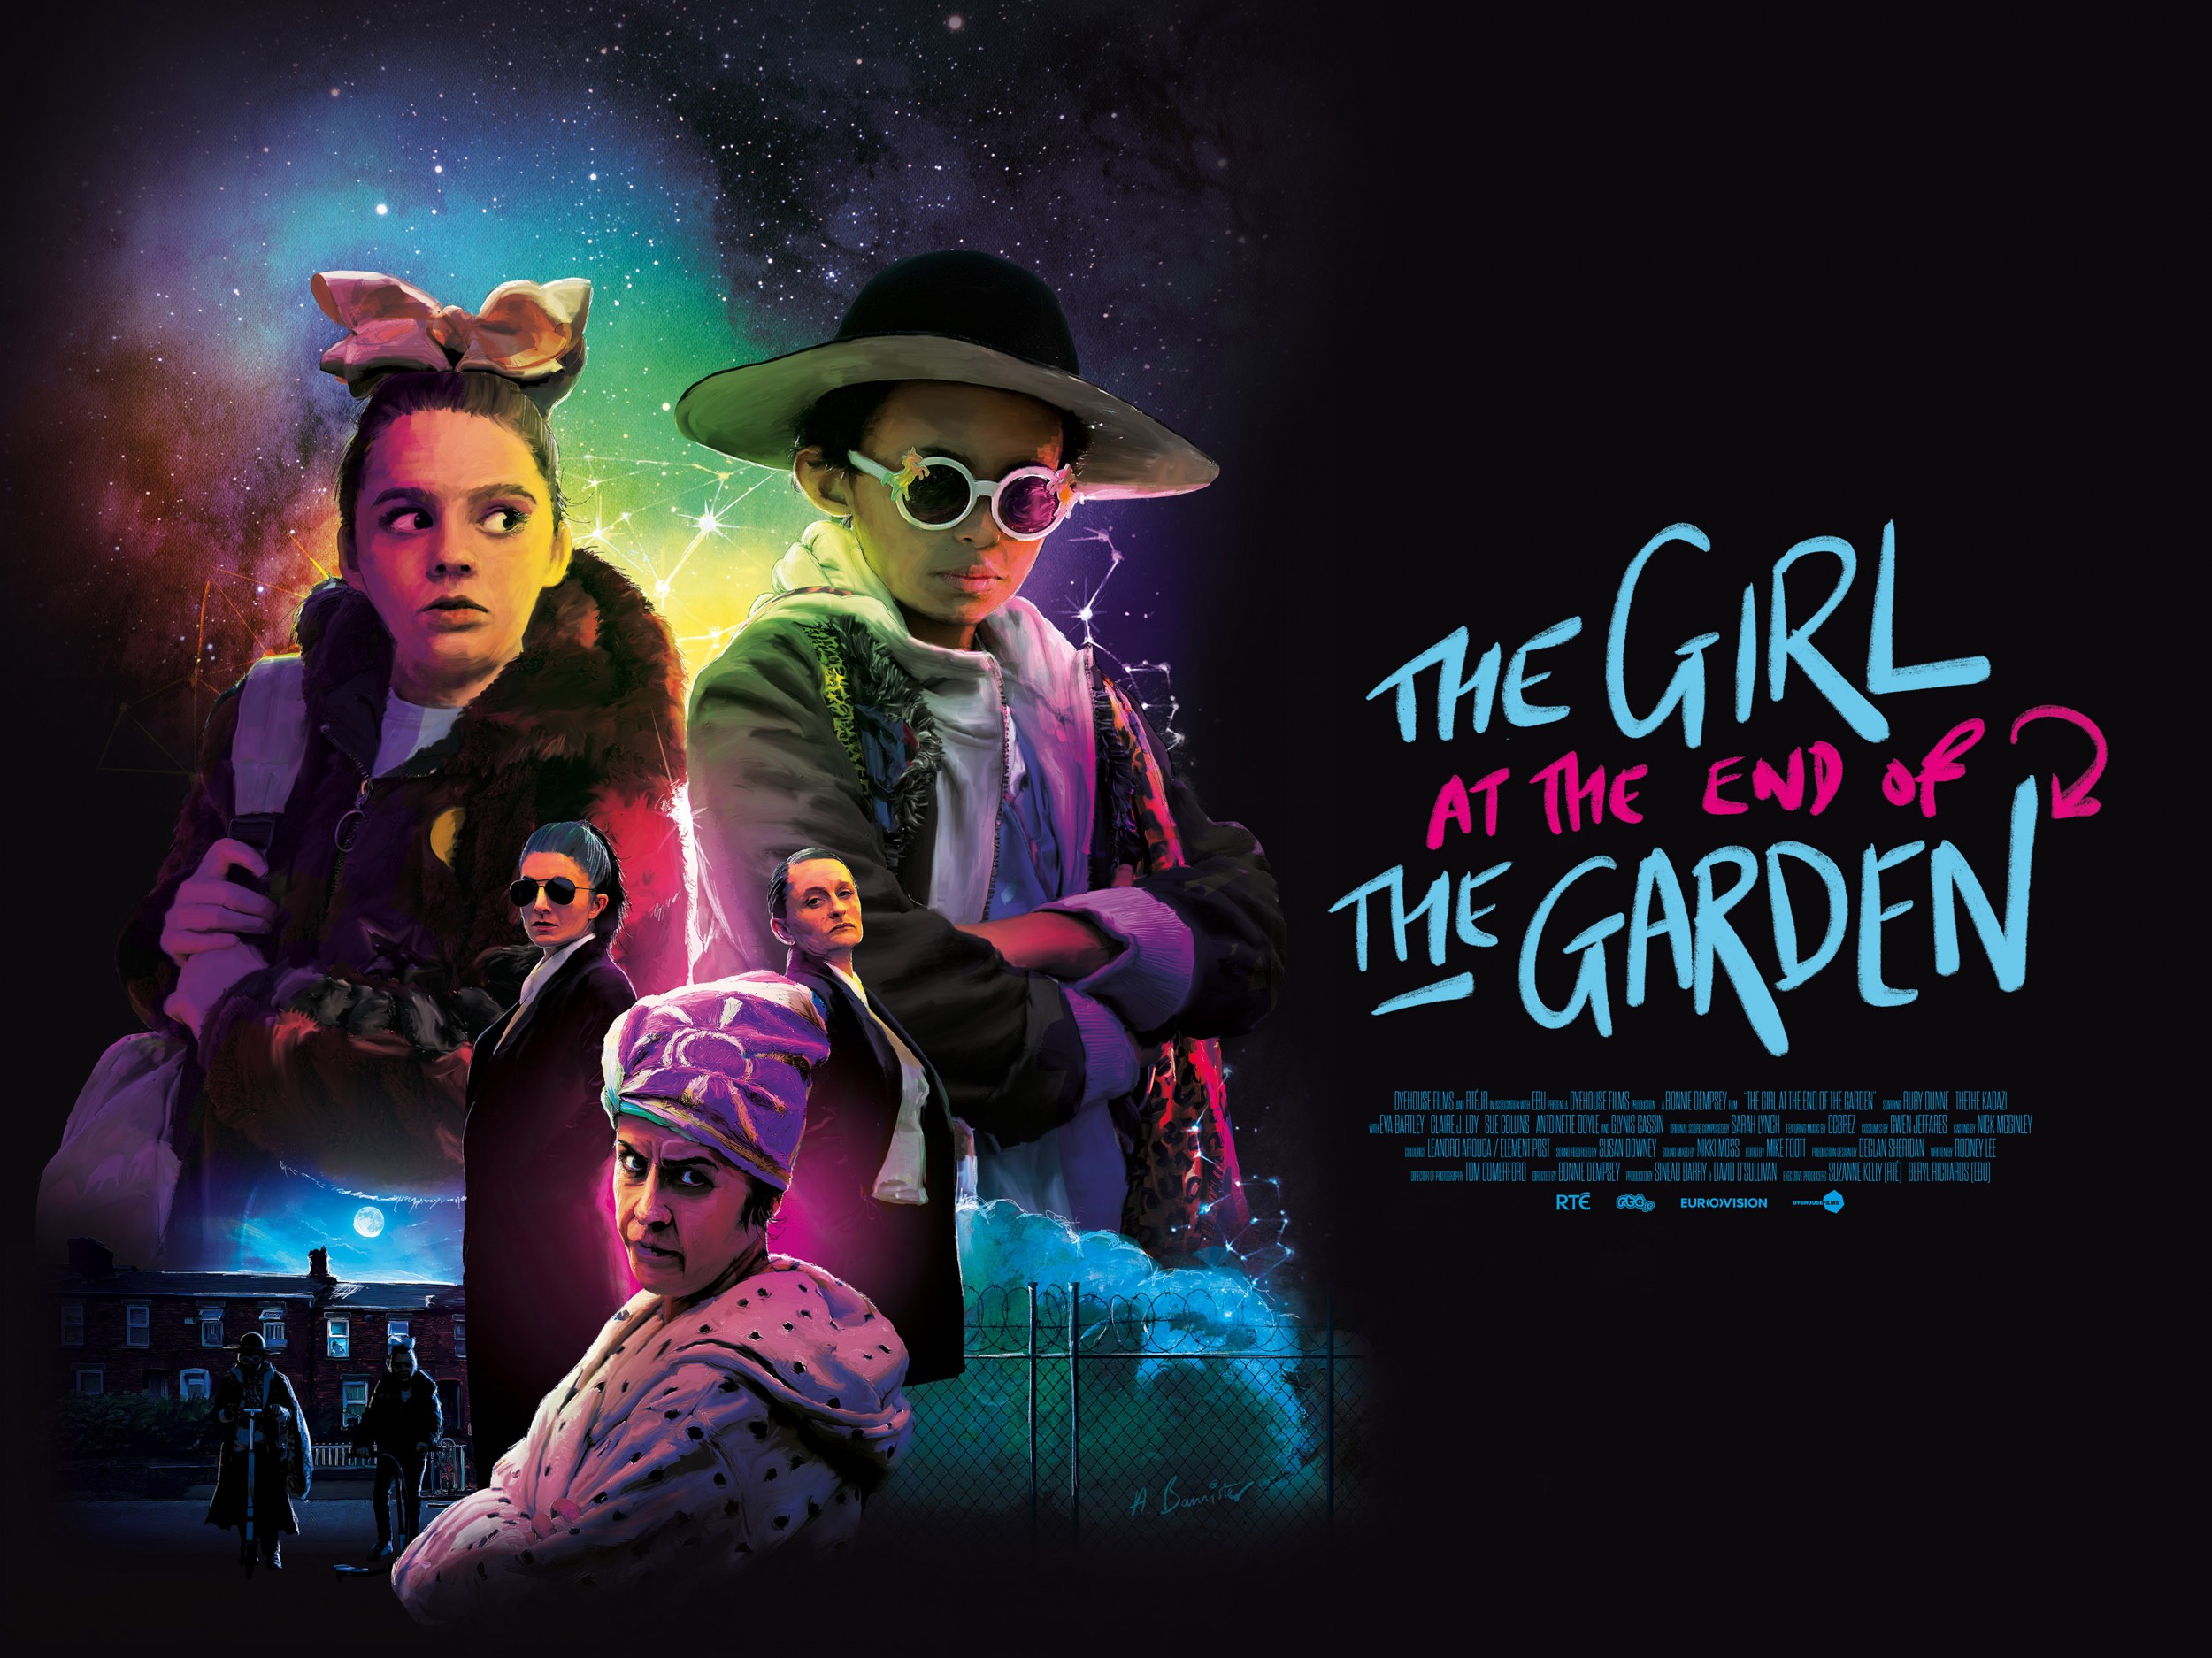 Mega Sized Movie Poster Image for The Girl at the End of the Garden